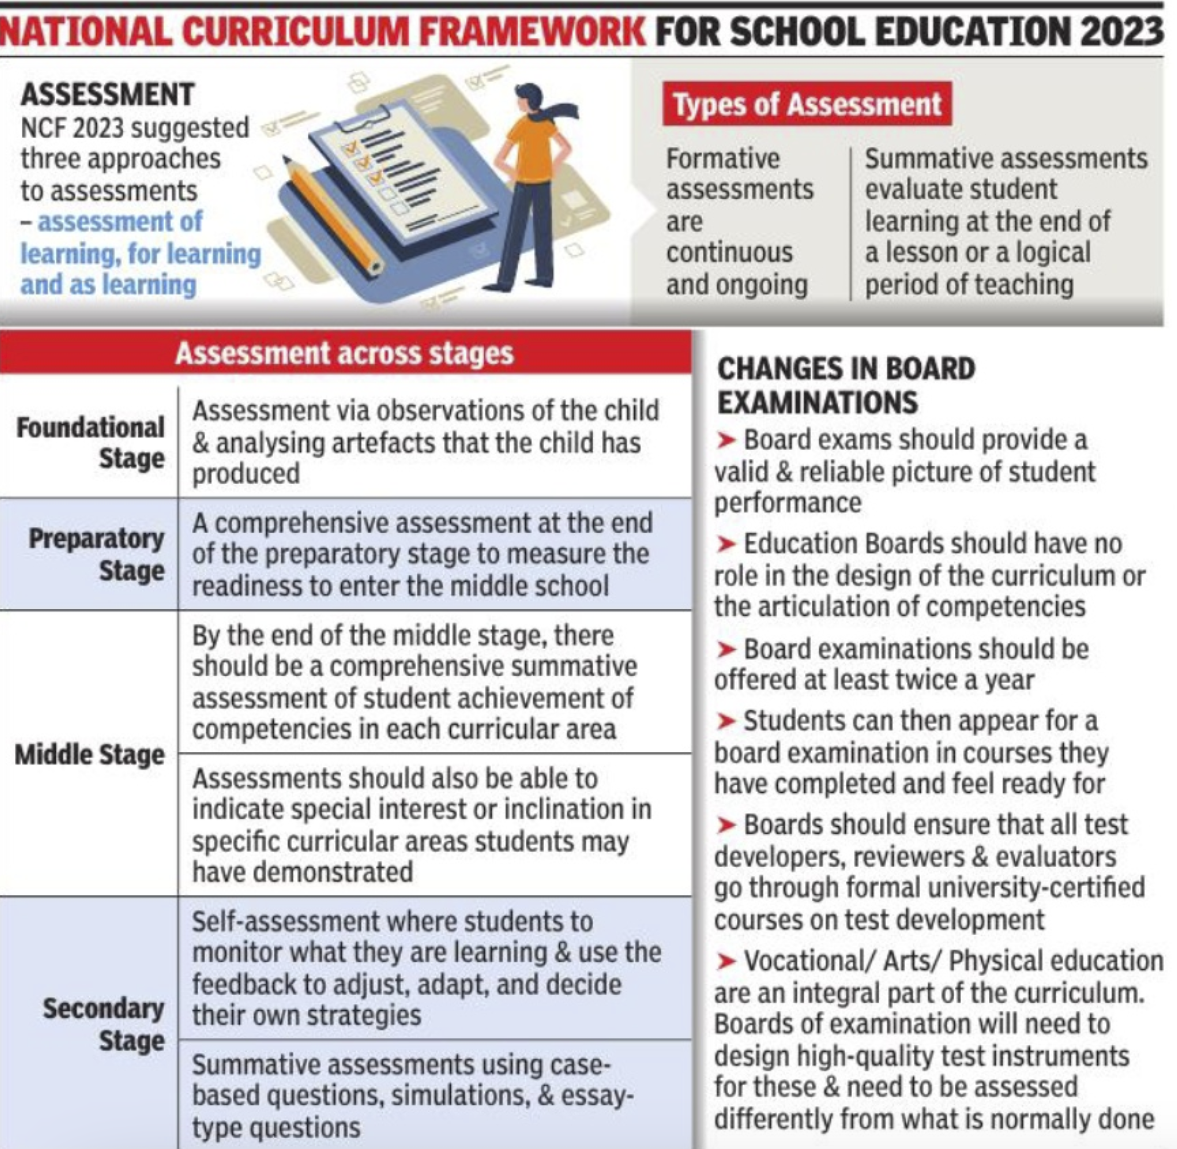 NCF for School Education 2023